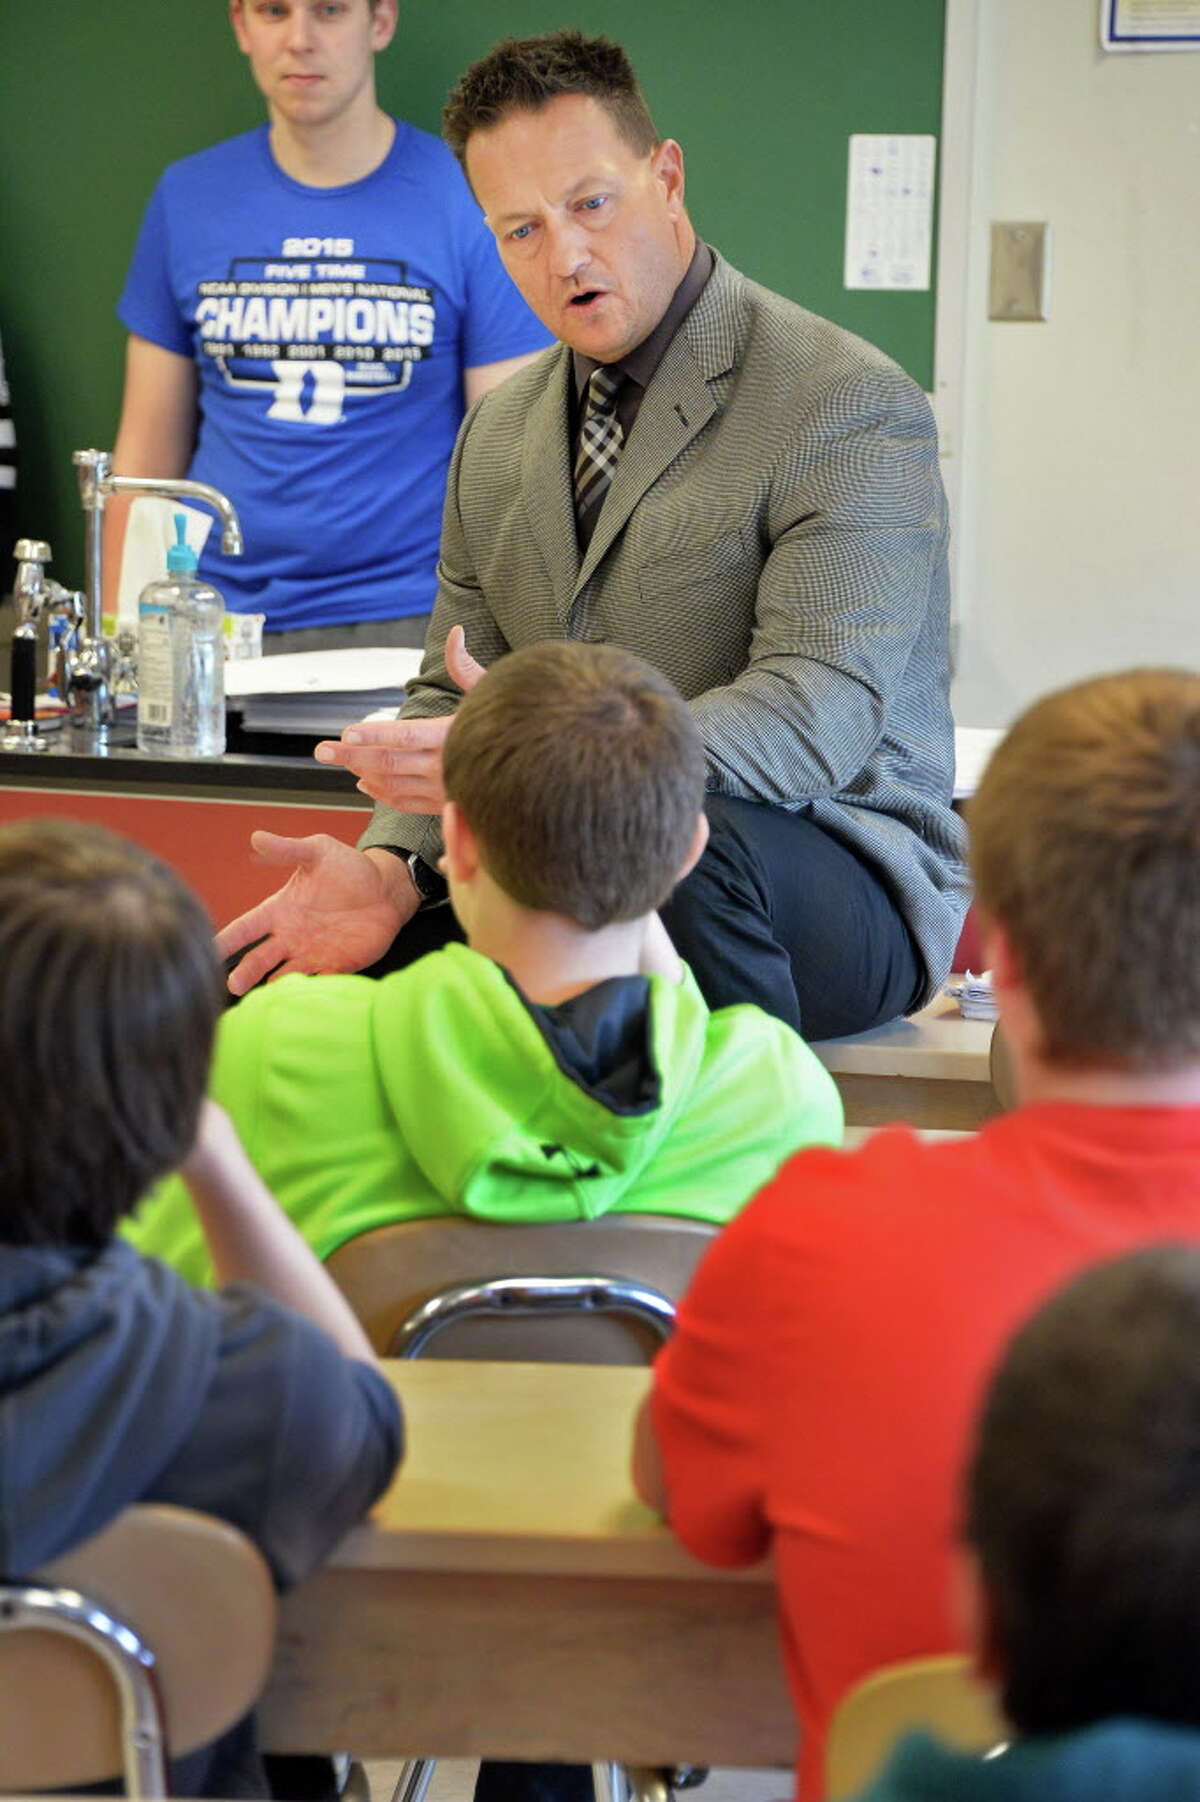 Columbia High School principal John Sawchuk introduces Columbia seniors to speak to middle school students about their experiences at Goff Middle School Friday April 24, 2015 in East Greenbush, NY. (John Carl D'Annibale / Times Union)